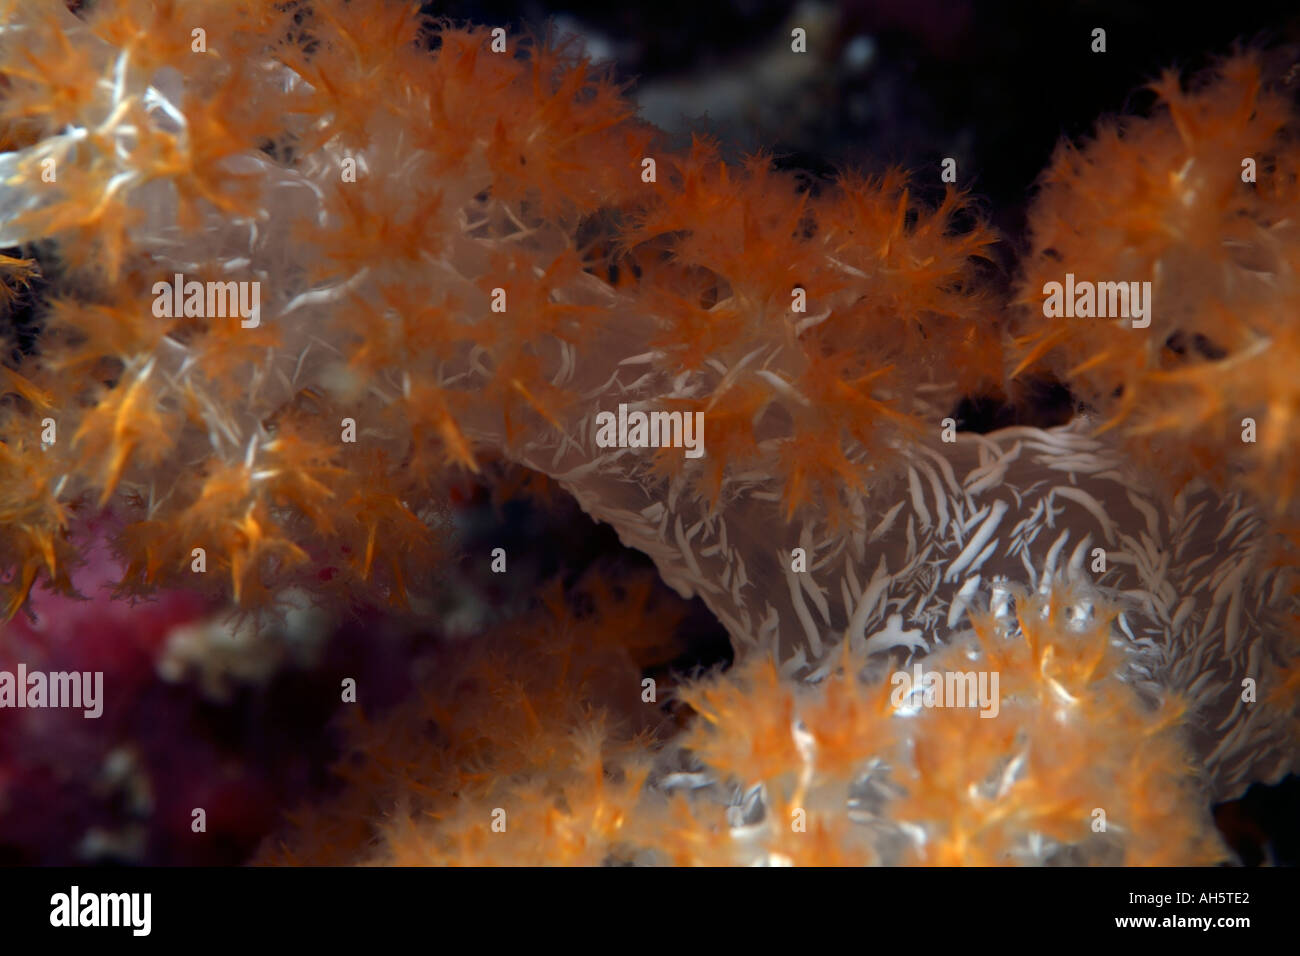 Maldives South Male Atoll Bocifushi Wreck An Orange Spiky Soft Coral Dendronephthya Sp Stock Photo